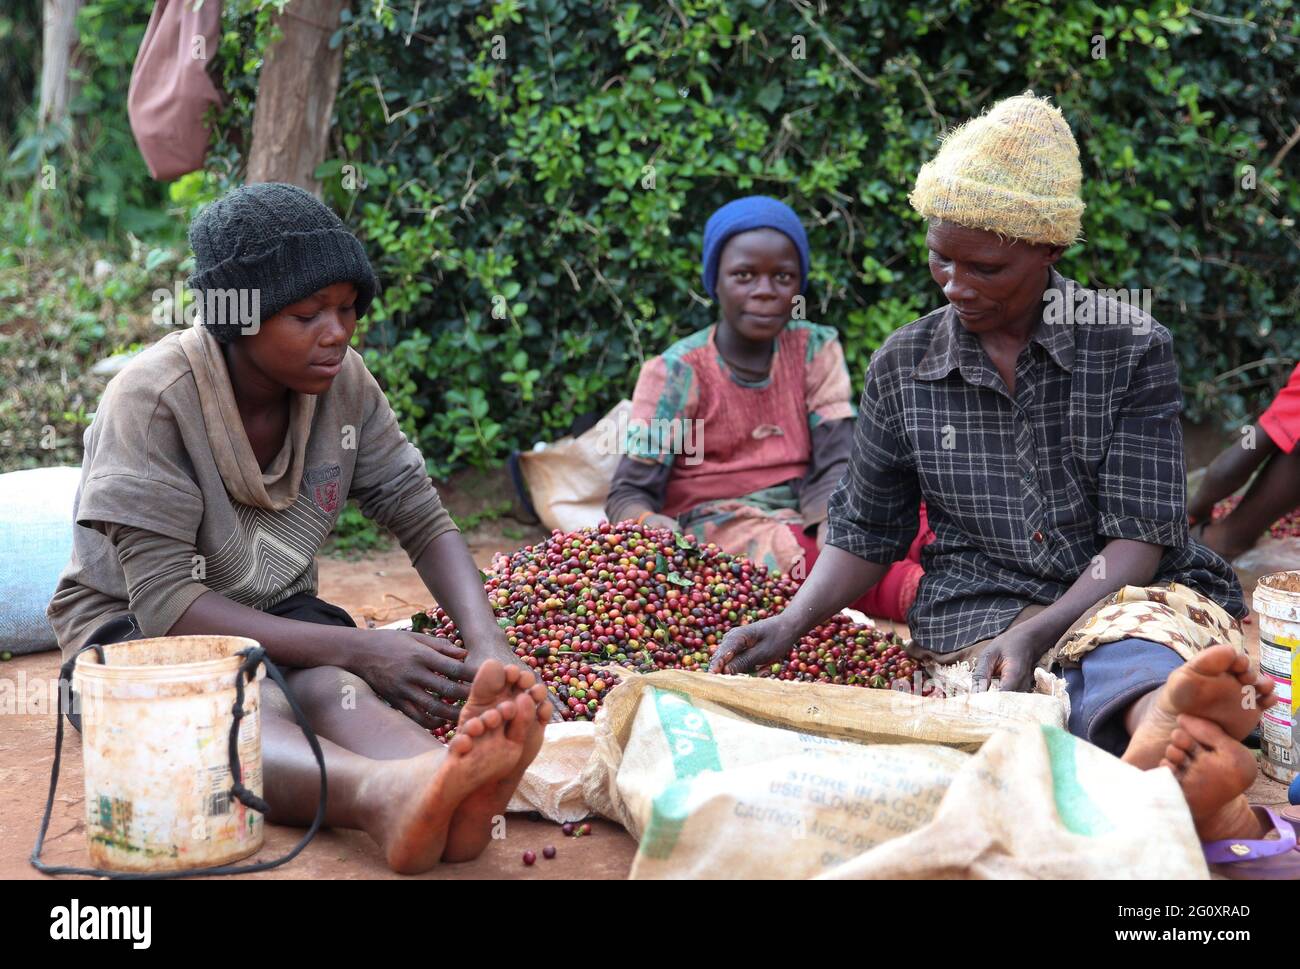 Ruiru, Kenya. 3rd June, 2021. Workers sort coffee beans at a coffee estate in Ruiru, a suburb on the outskirts of Nairobi, Kenya, on June 3, 2021. Recently, Kenya entered the coffee bean harvest season. Coffee is one of the major foreign exchange earners for Kenya, with the crop contributing about six percent of total export earnings and 0.3 percent of the country's gross domestic product. Credit: Long Lei/Xinhua/Alamy Live News Stock Photo